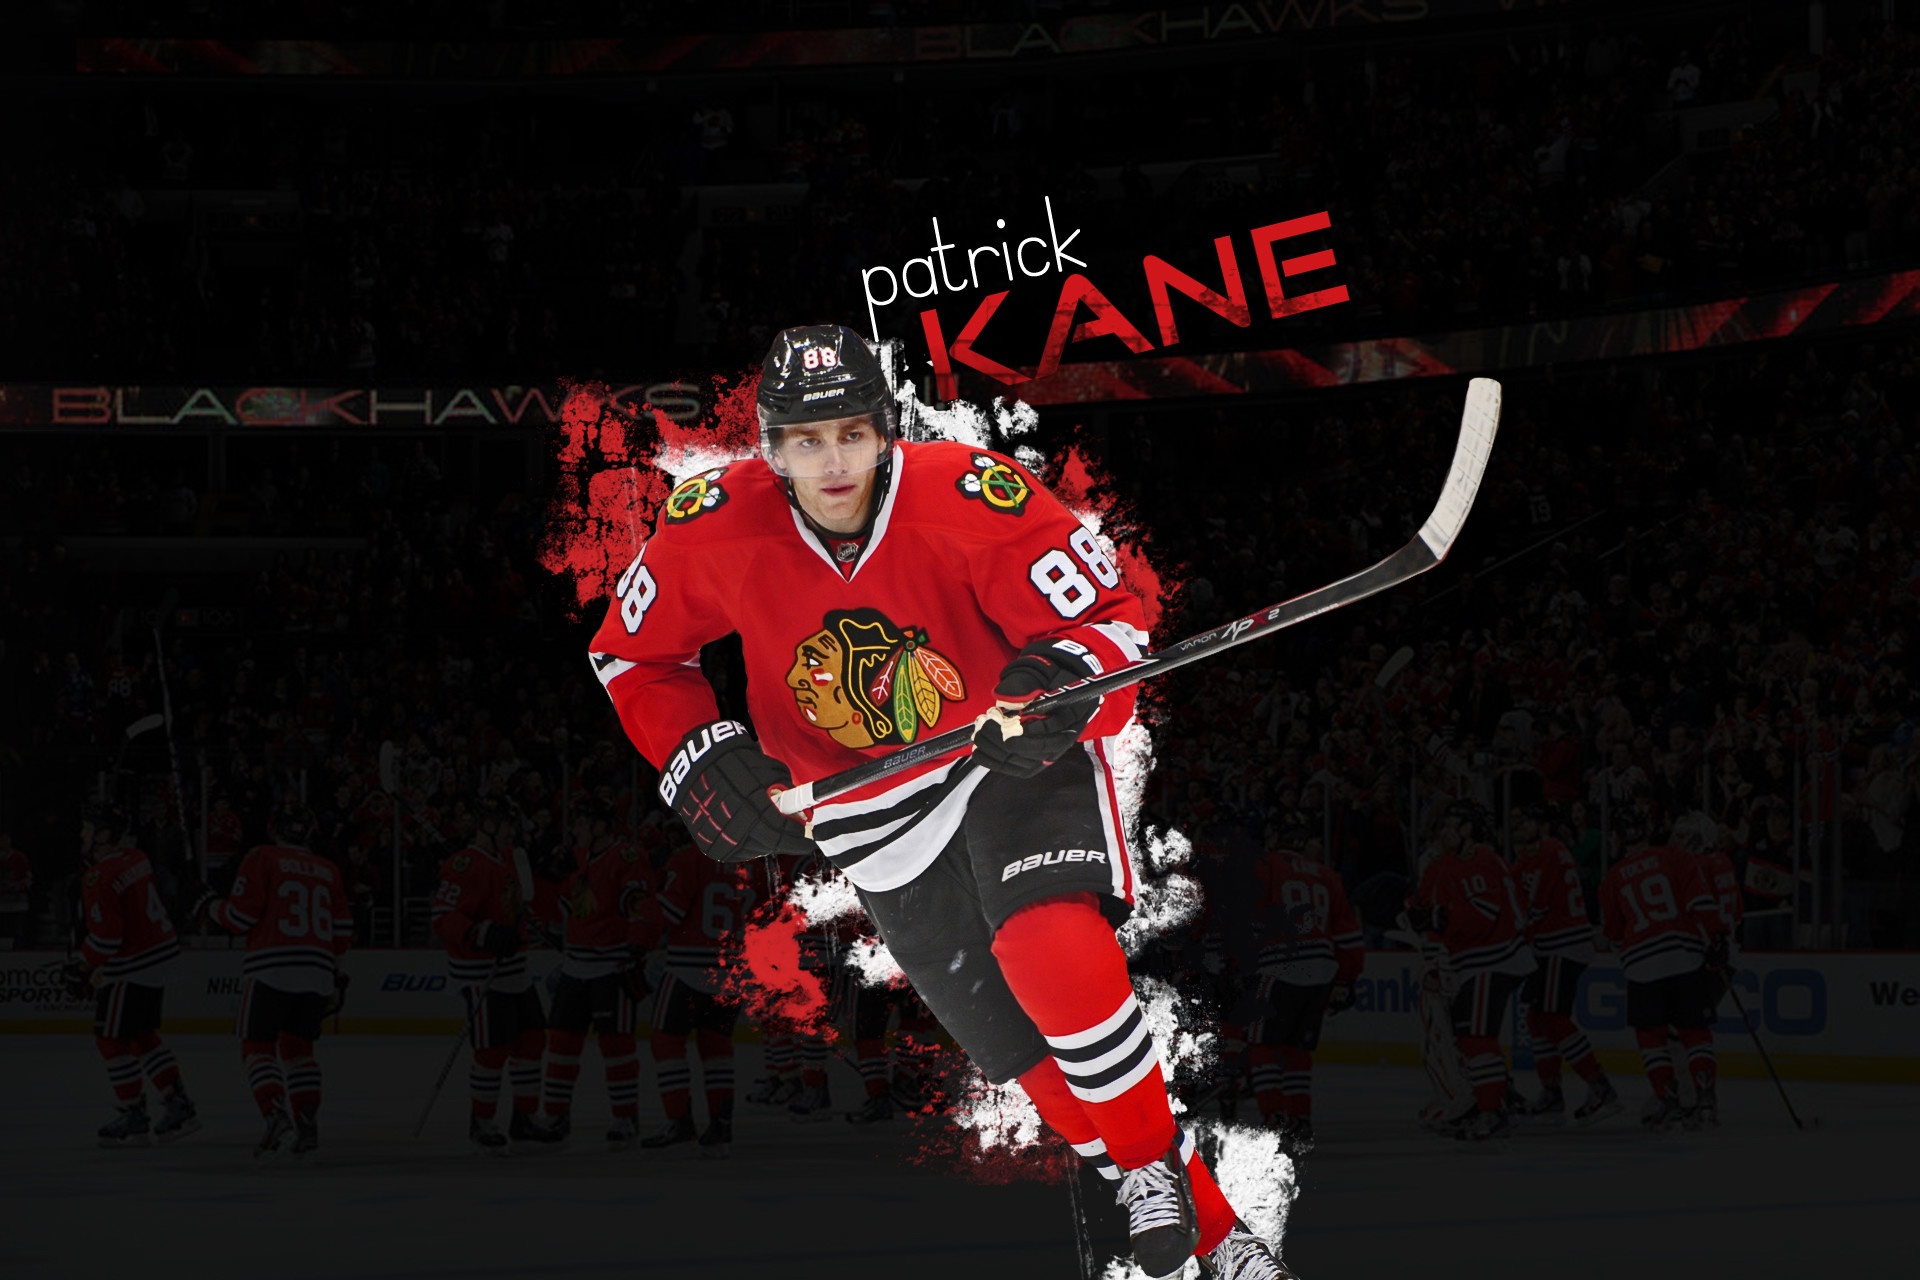 1920x1280 NHL Wallpaper featuring Patrick Kane from Chicago Blackhawks. Don't really  like Kane but